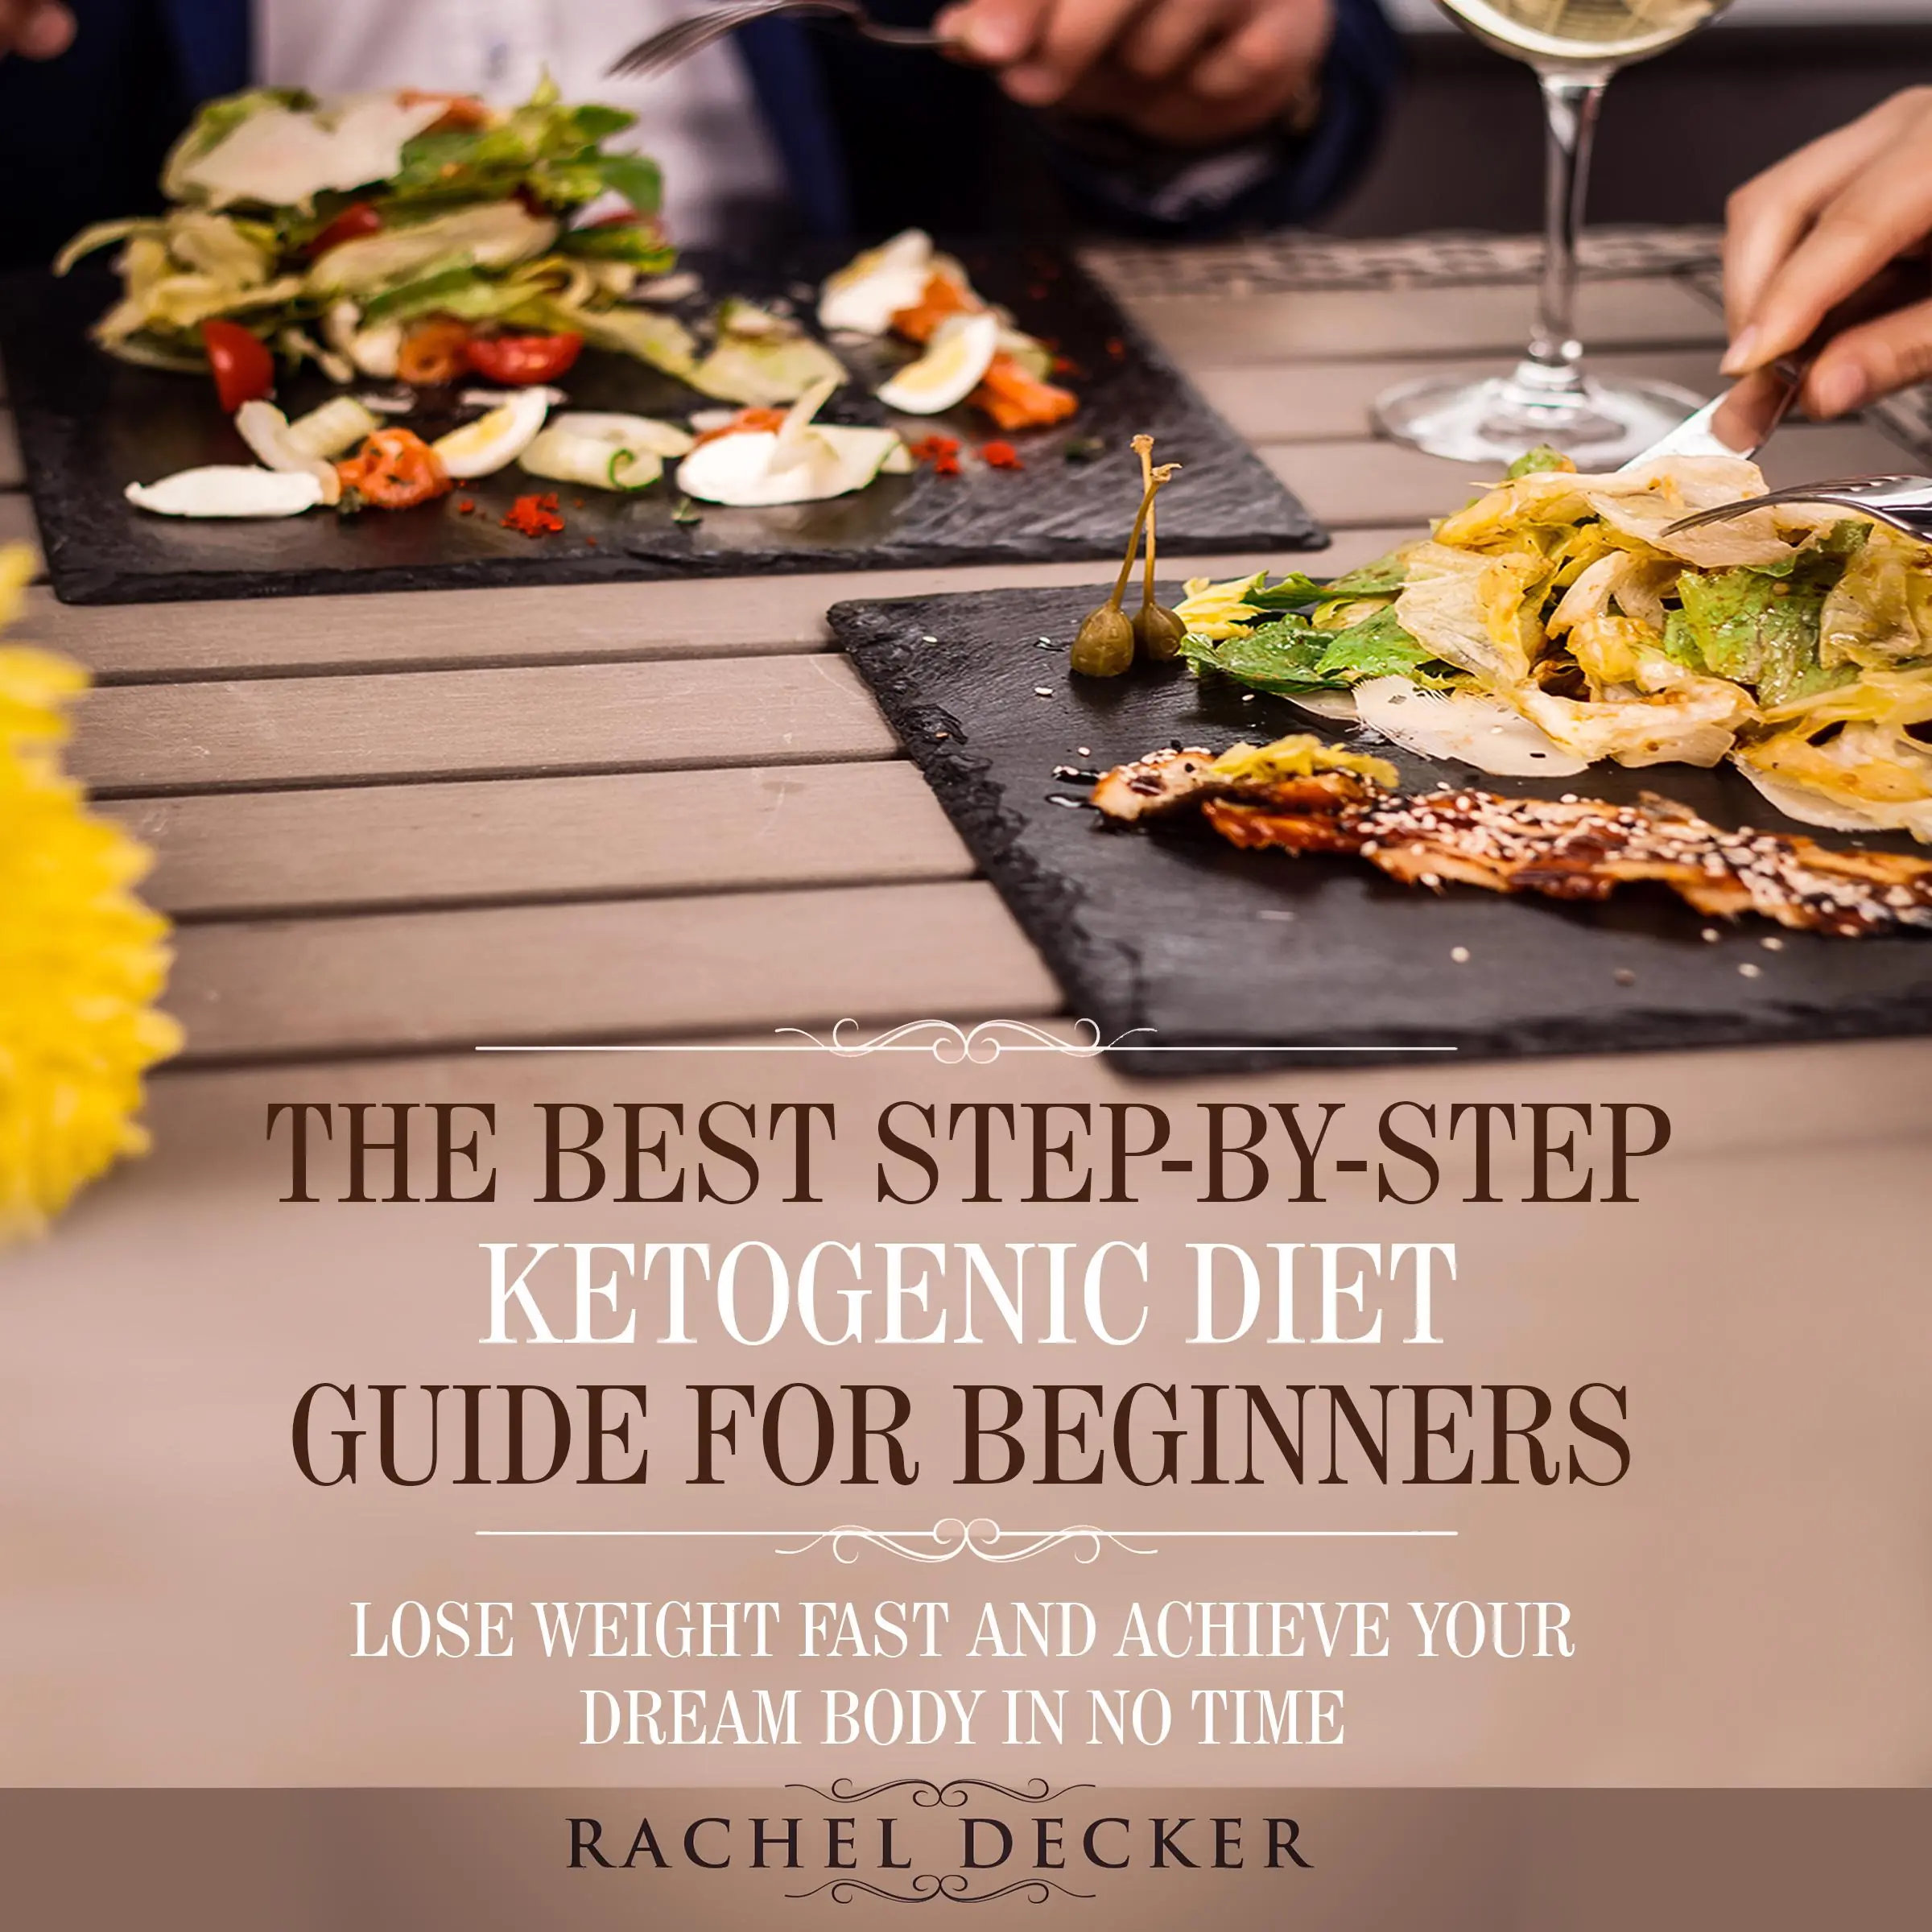 The Best Step-by-Step Ketogenic Diet Guide for Beginners: Lose Weight Fast and Achieve Your Dream Body in No Time Audiobook by Rachel Decker